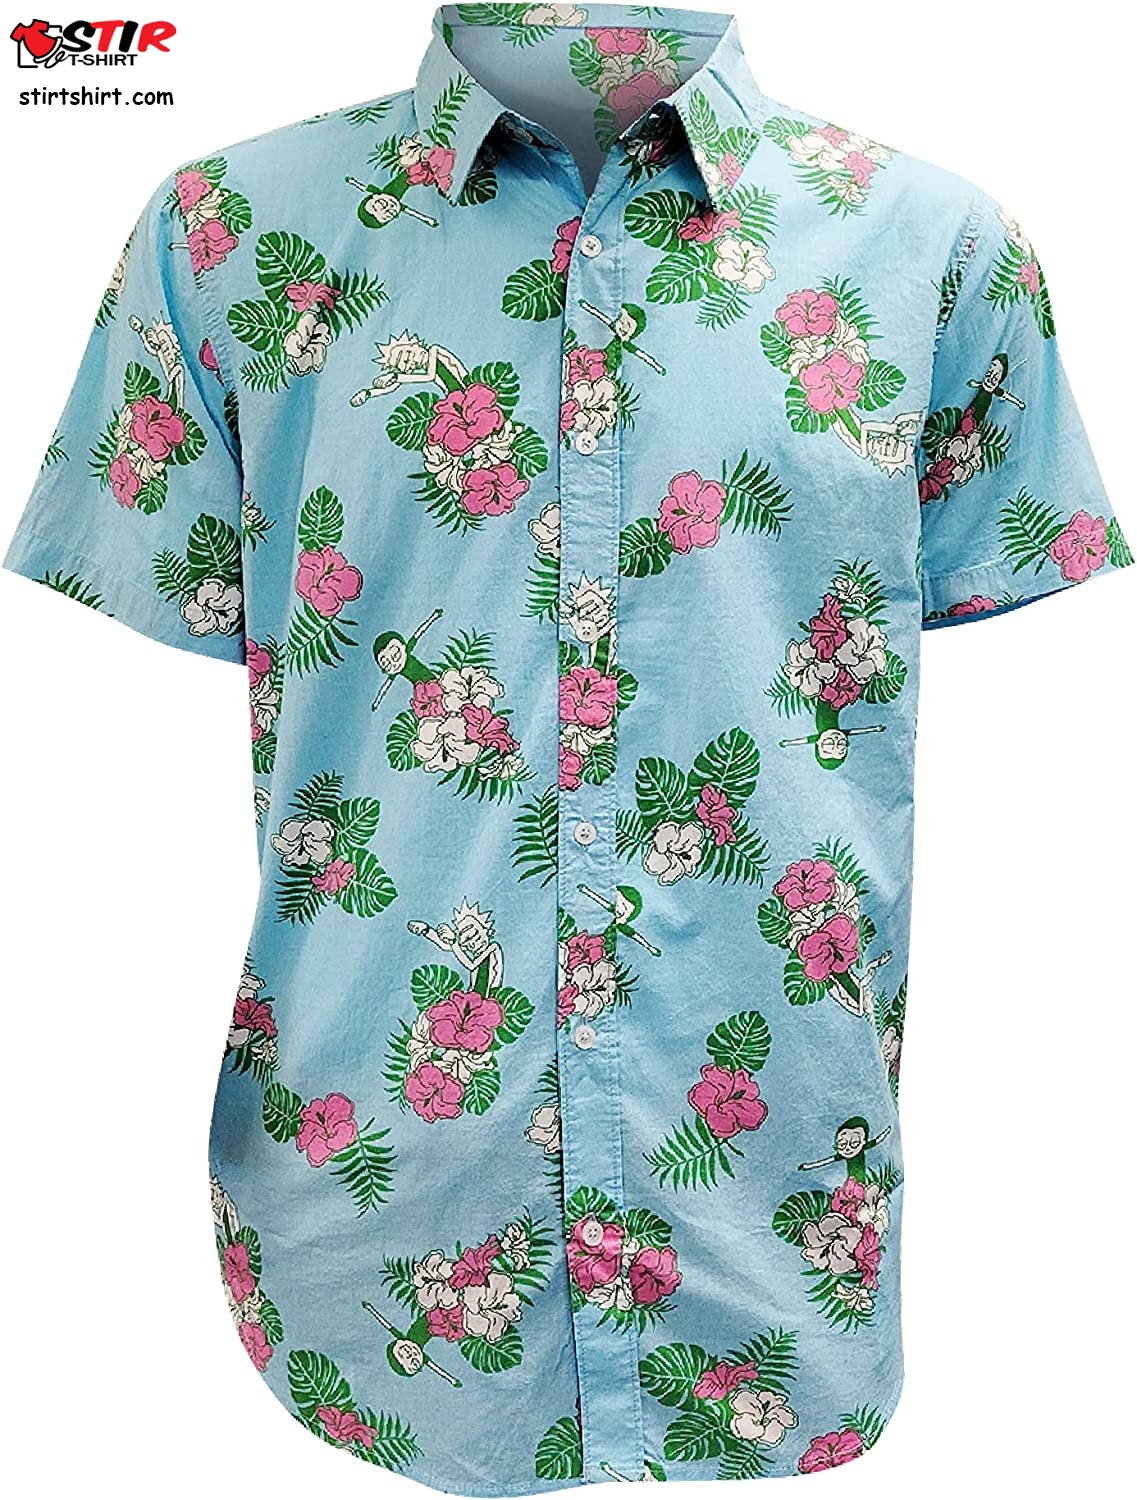 Ripple Junction Rick And Morty Adult Unisex Hawaiian Floral Dancing Light Weight Button Down Shirt1